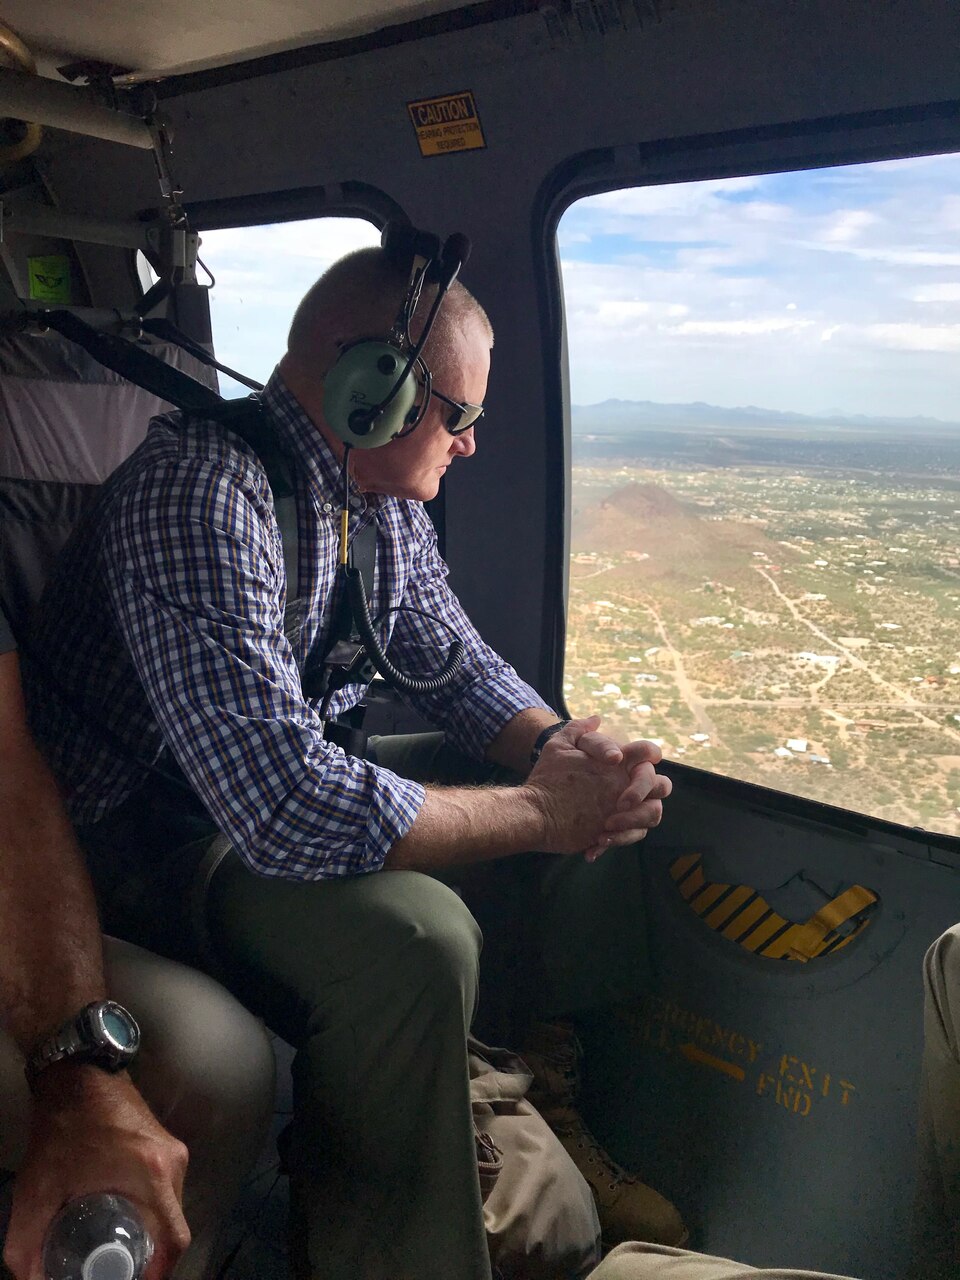 Marine Corps Sgt. Maj. Paul McKenna of North American Aerospace Defense Command and U.S. Northern Command surveils the rural, expansive U.S.-Mexico border area from a Black Hawk helicopter.